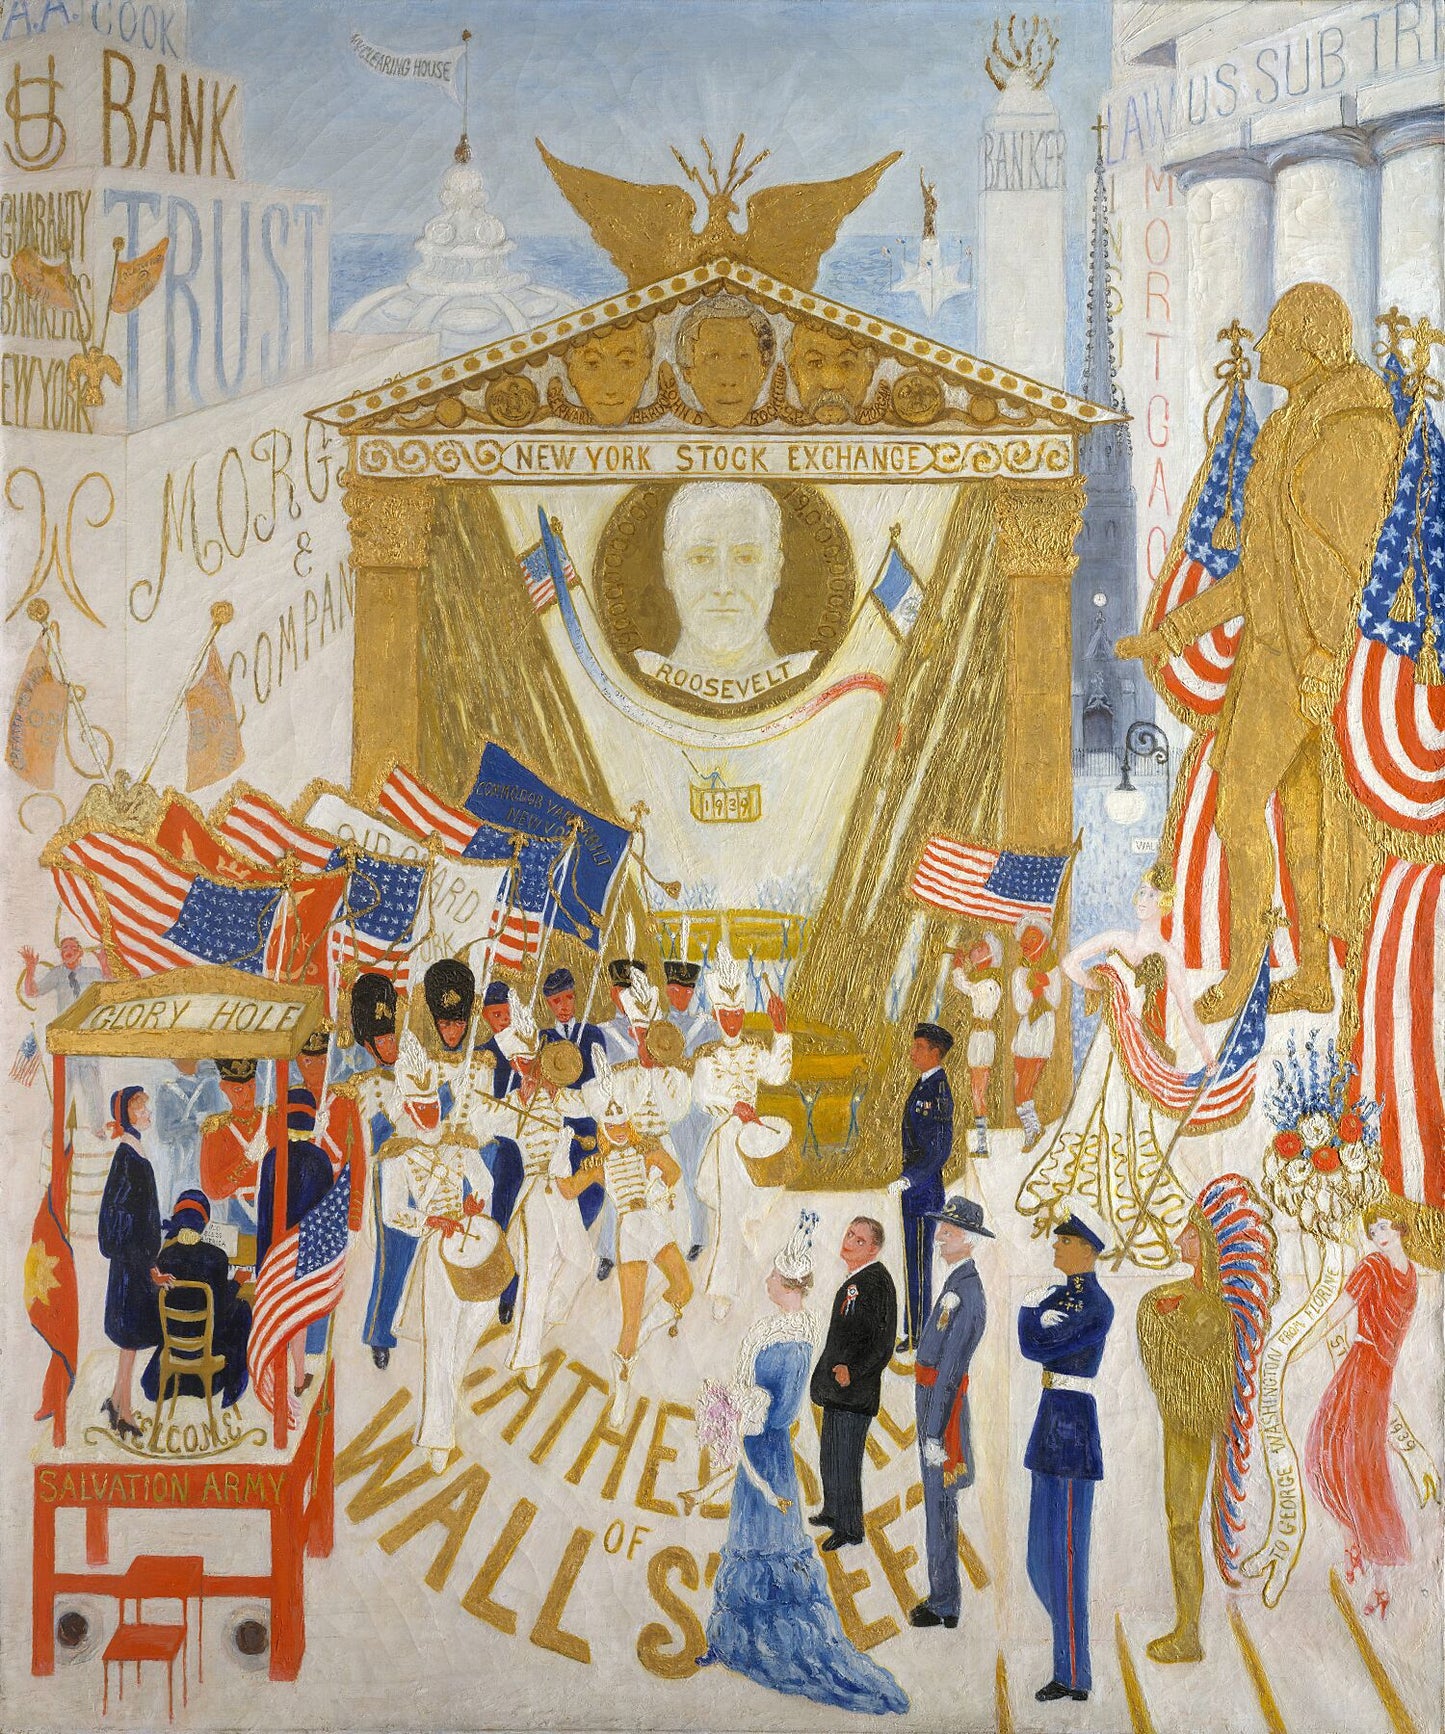 The Cathedrals of Wall Street by Florine Stettheimer - 1939